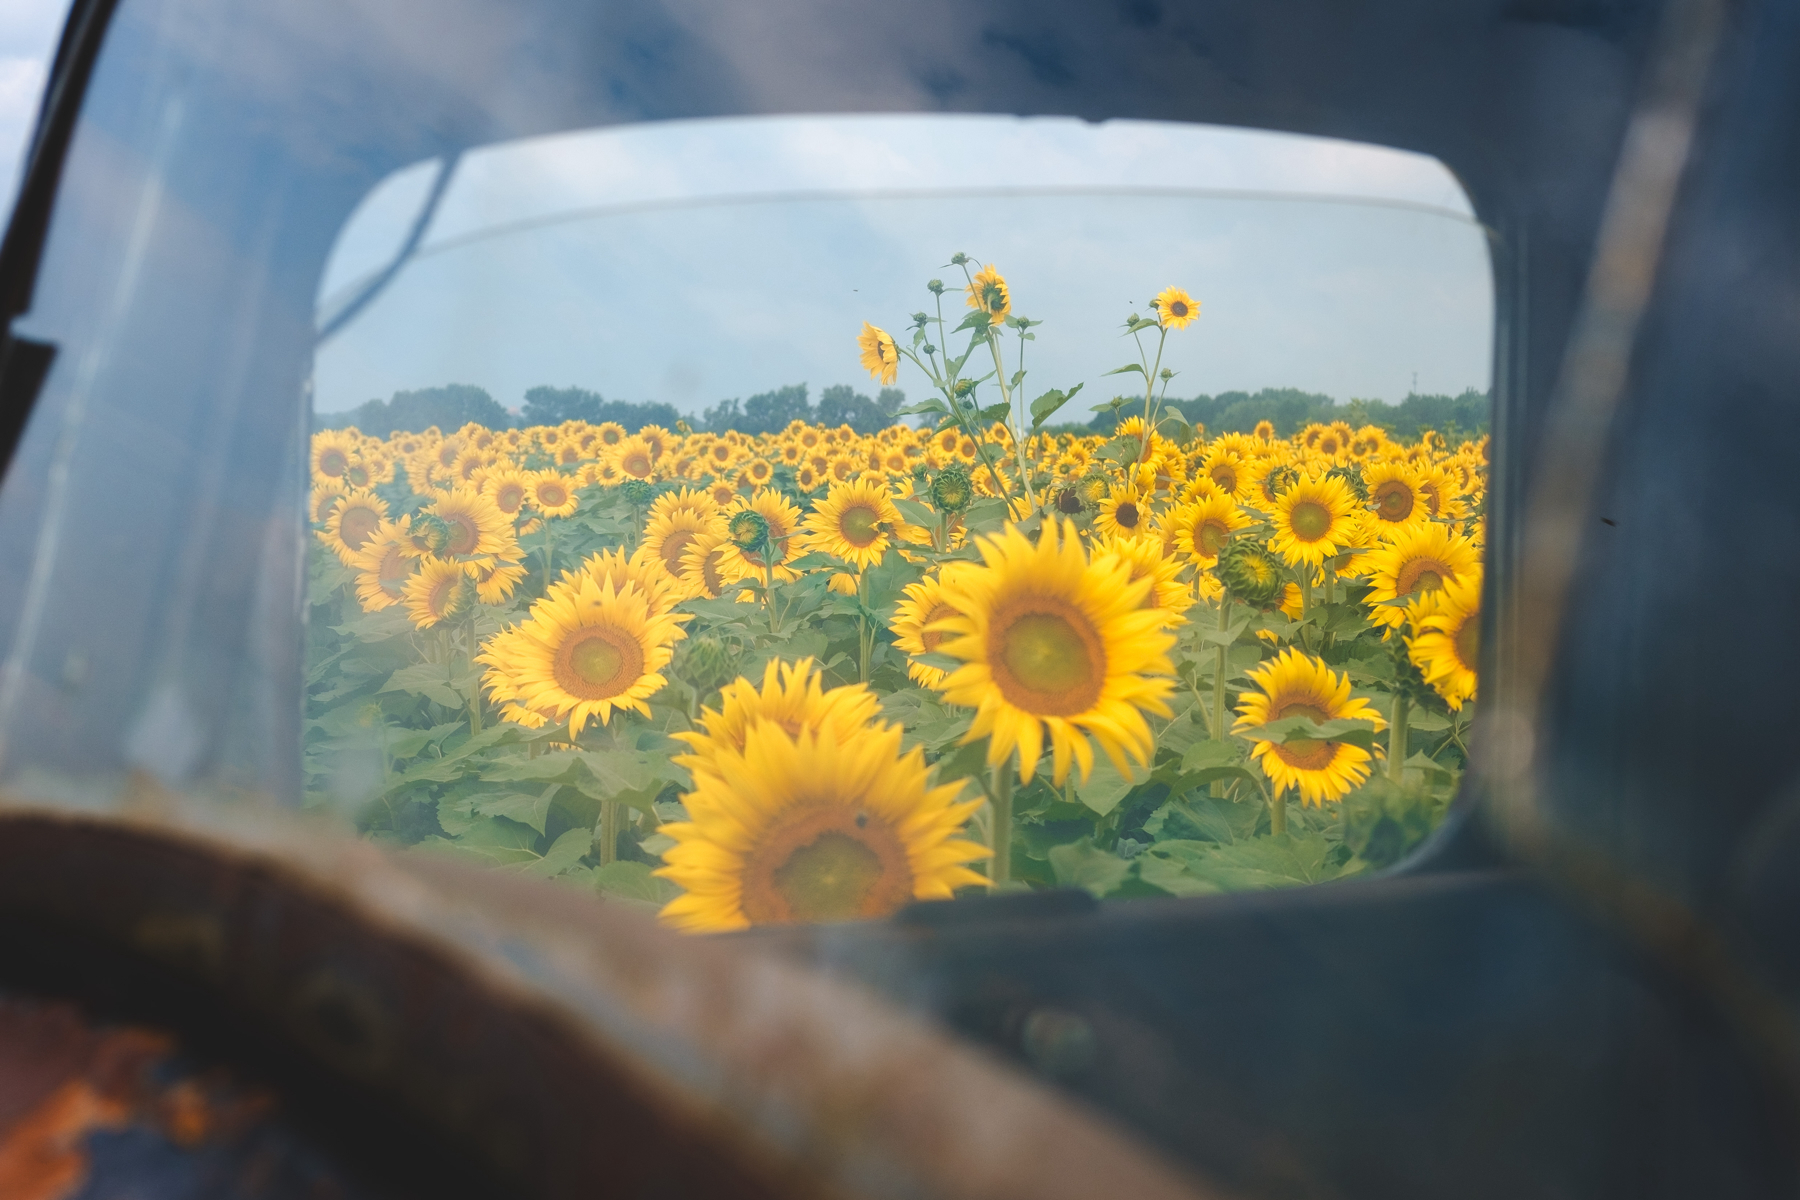 A field of sunflowers viewed through the window of a vintage vehicle.